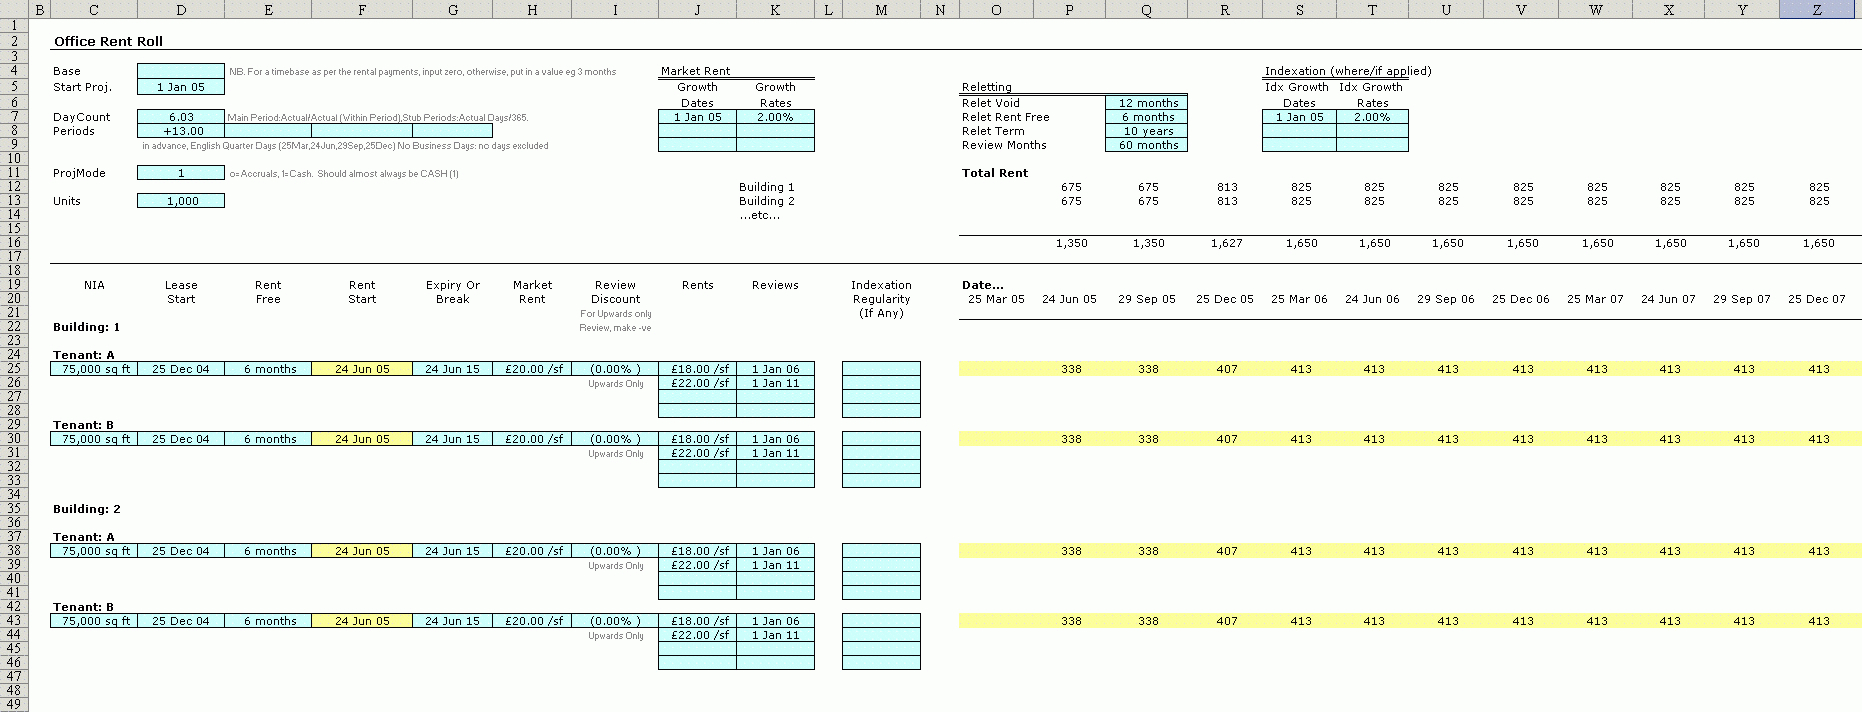 Rent Roll Spreadsheet Throughout Rent Roll Spreadsheet – Spreadsheet Collections